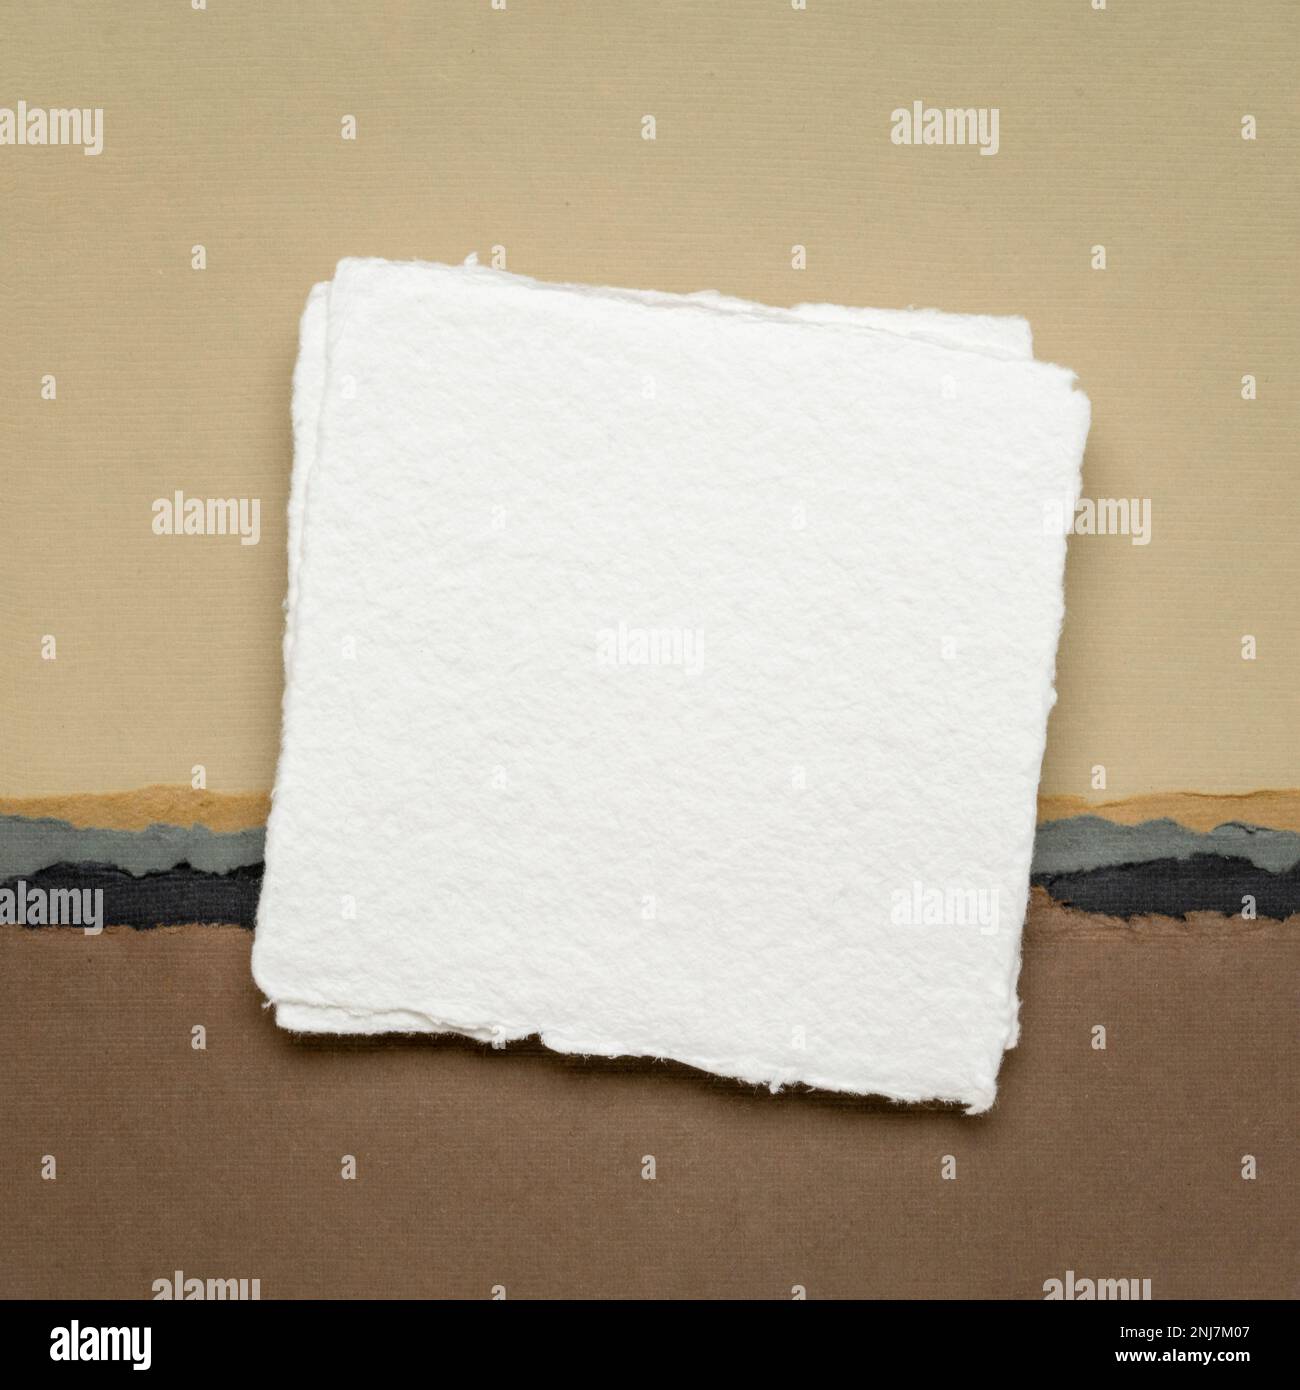 small square sheet of blank white Khadi paper against abstract in